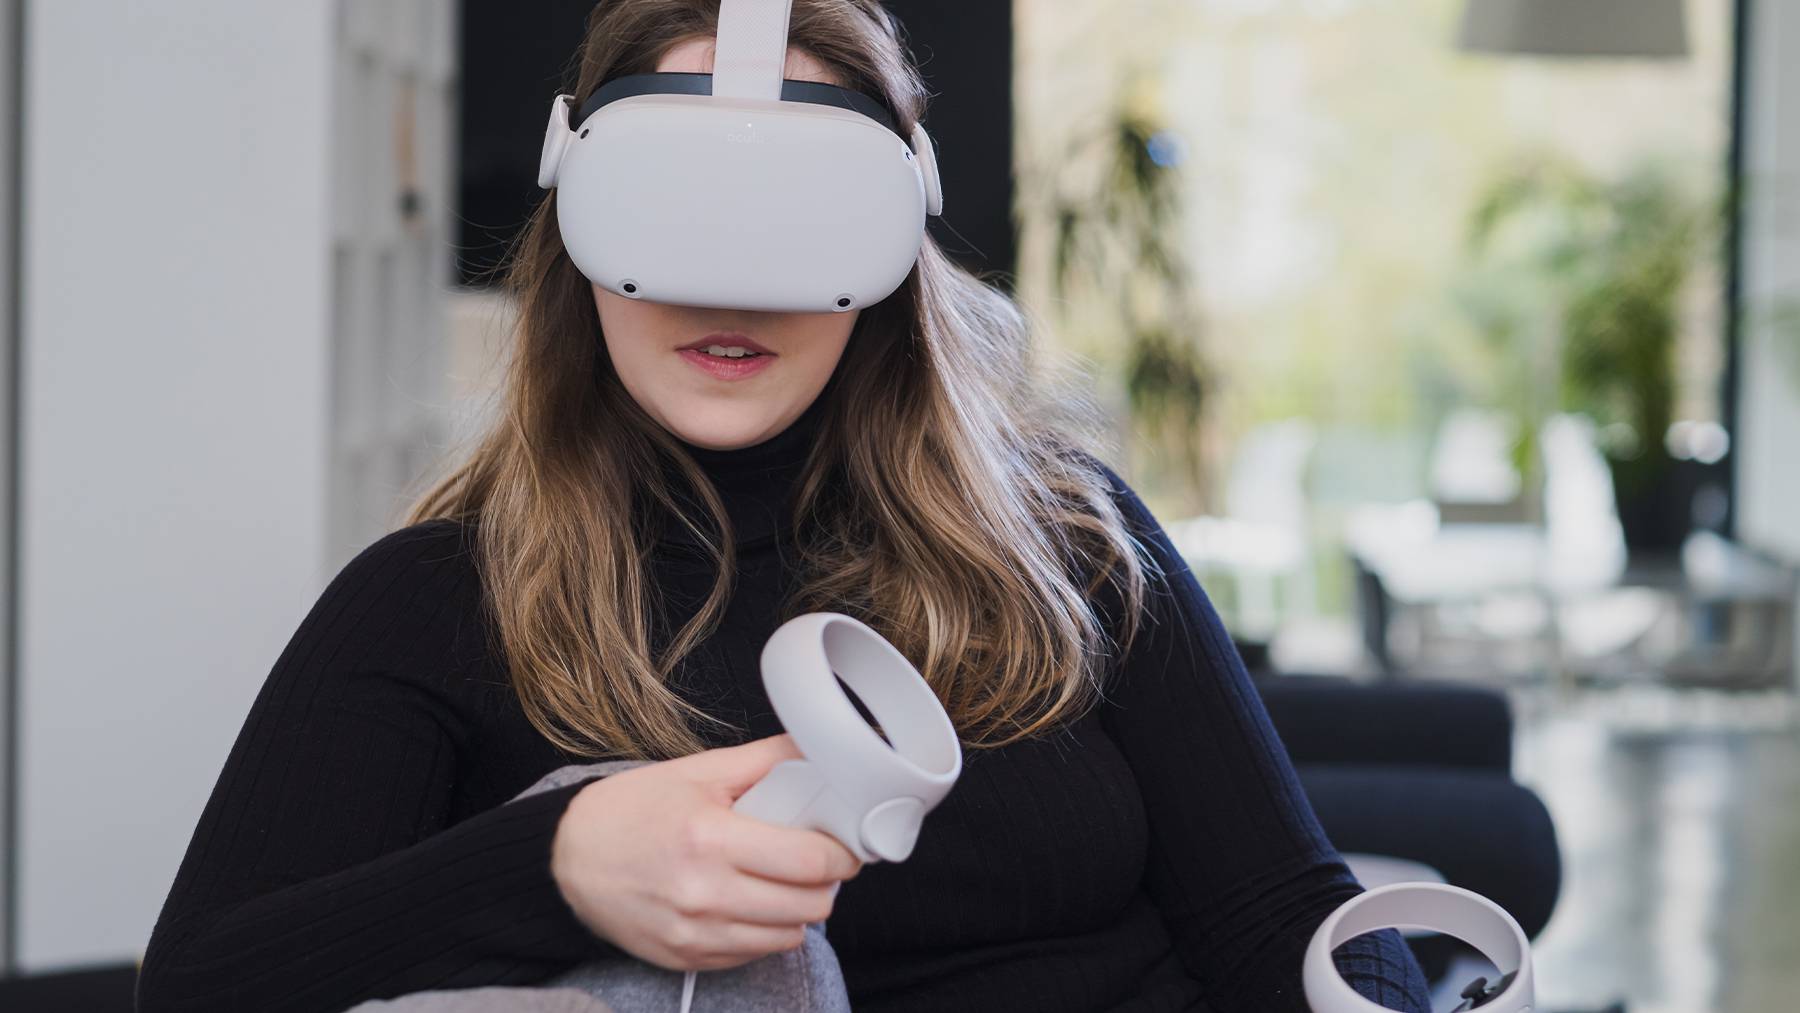 A woman in a black sweater wears a VR headset that covers her eyes.